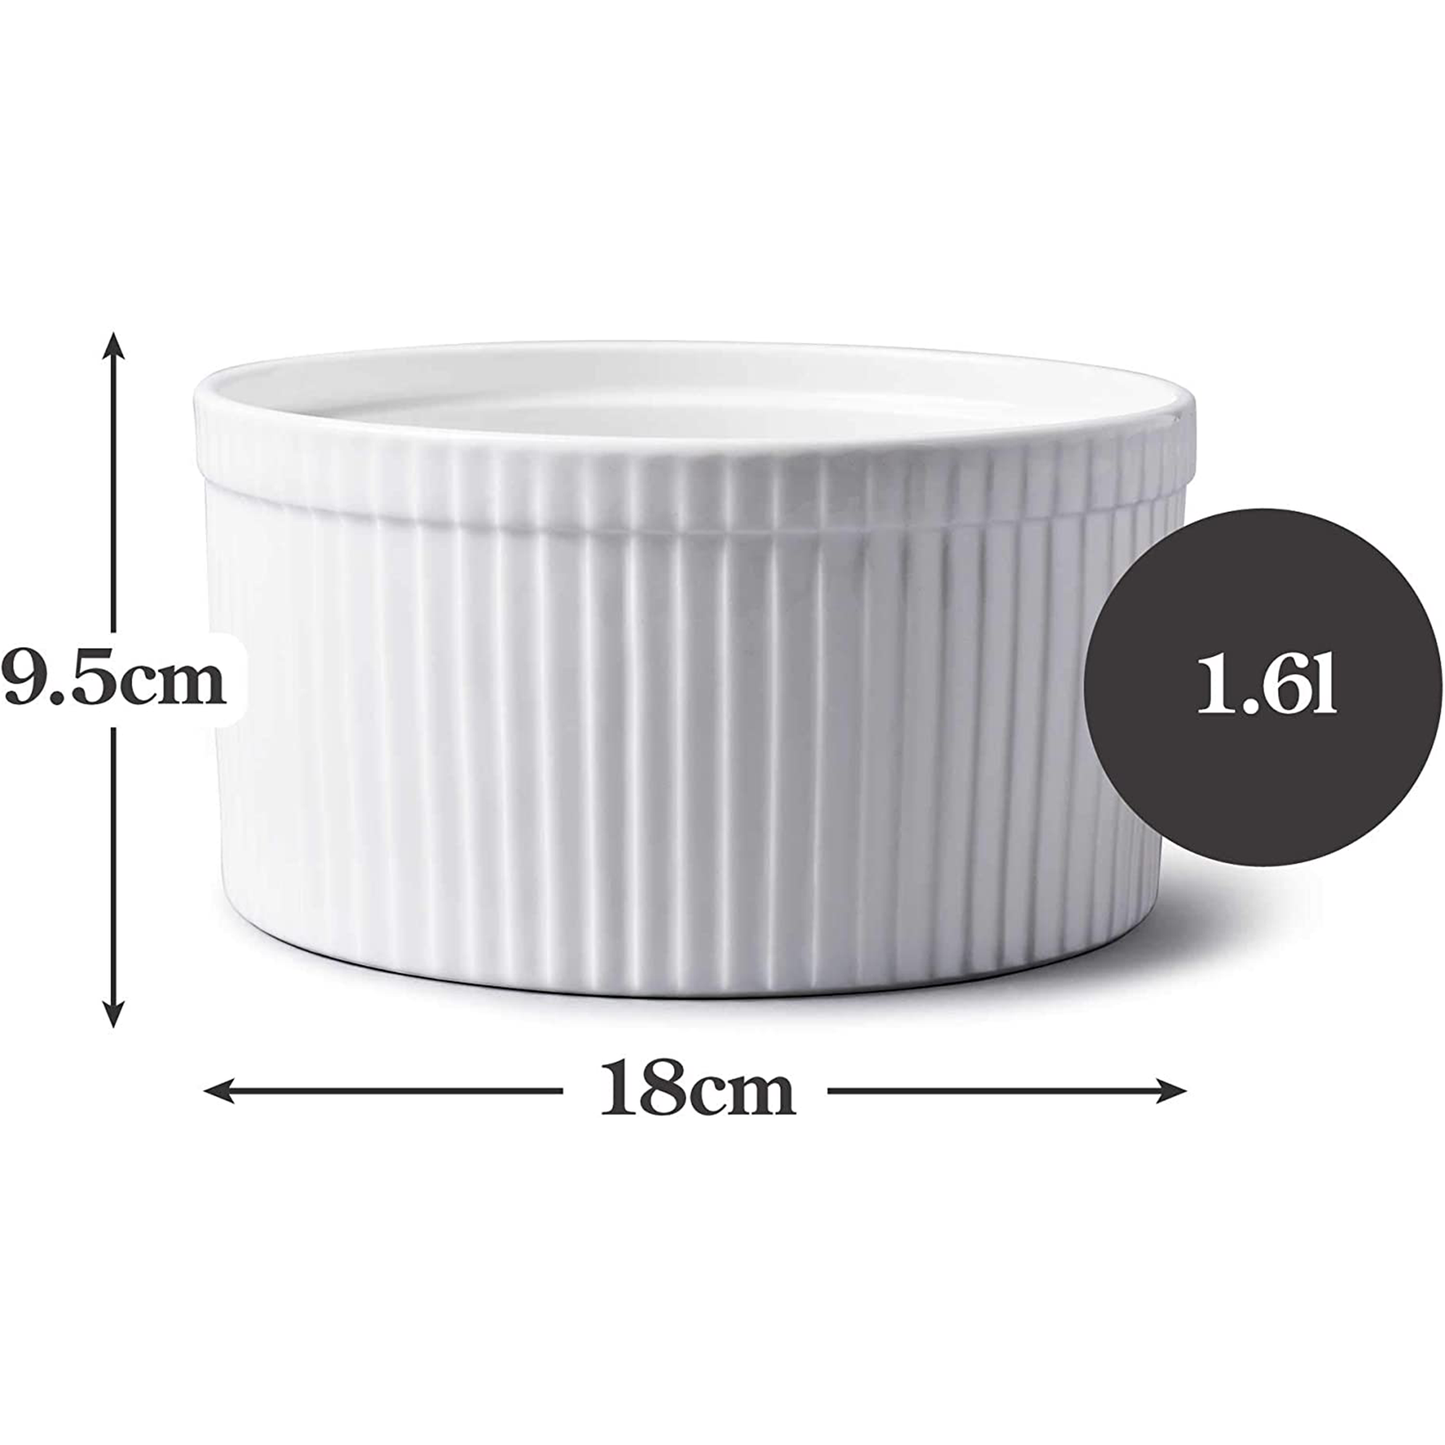 An image depicting the dimensions of the ramekin